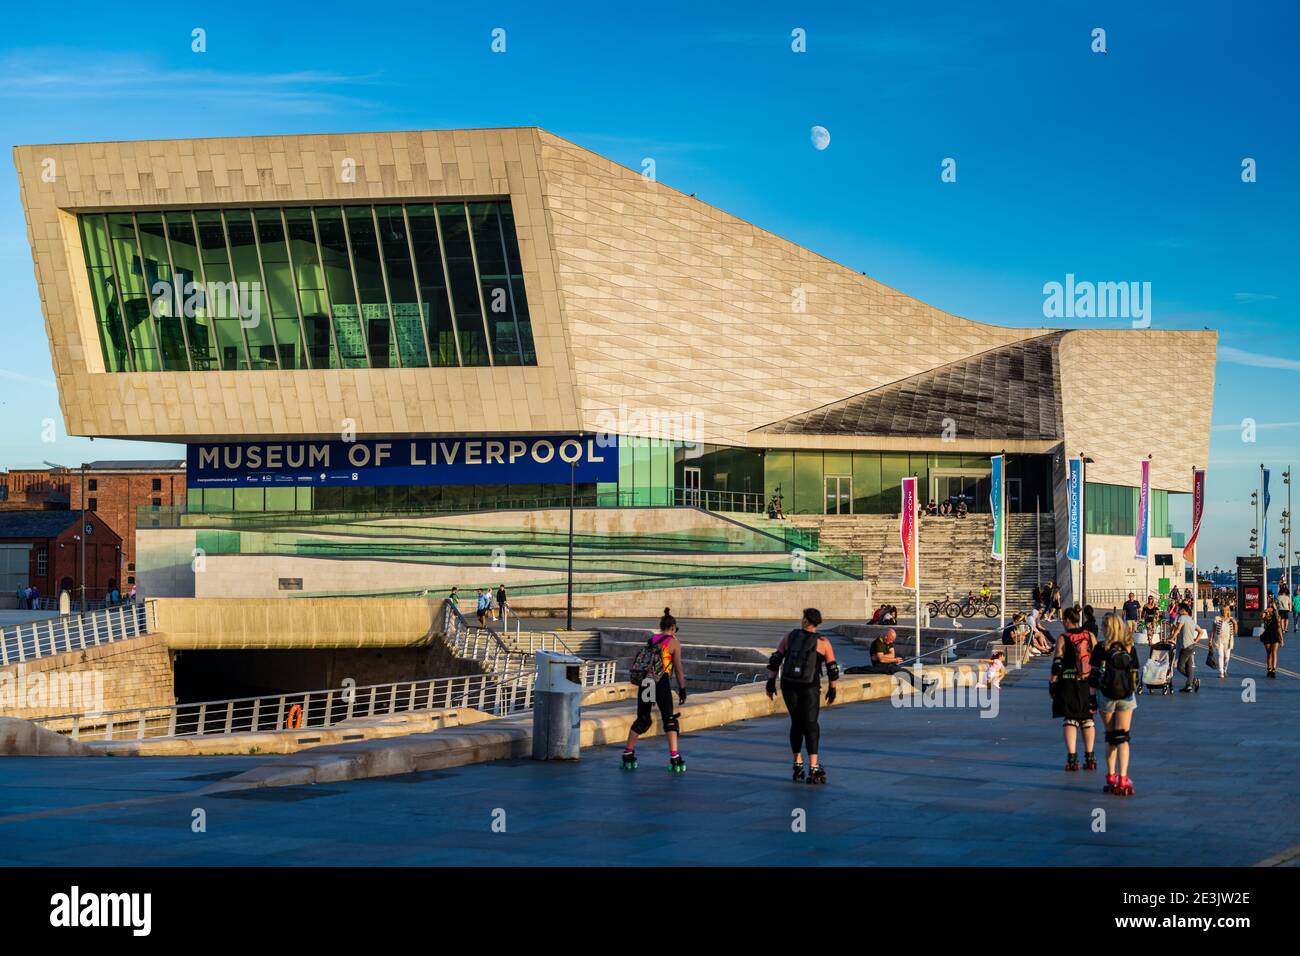 The Museum of Liverpool on the Mann Island site at Pier Head on the River Mersey. Opened 2011 Architects 3XN Kim Neilsen. Liverpool Tourism. Stock Photo